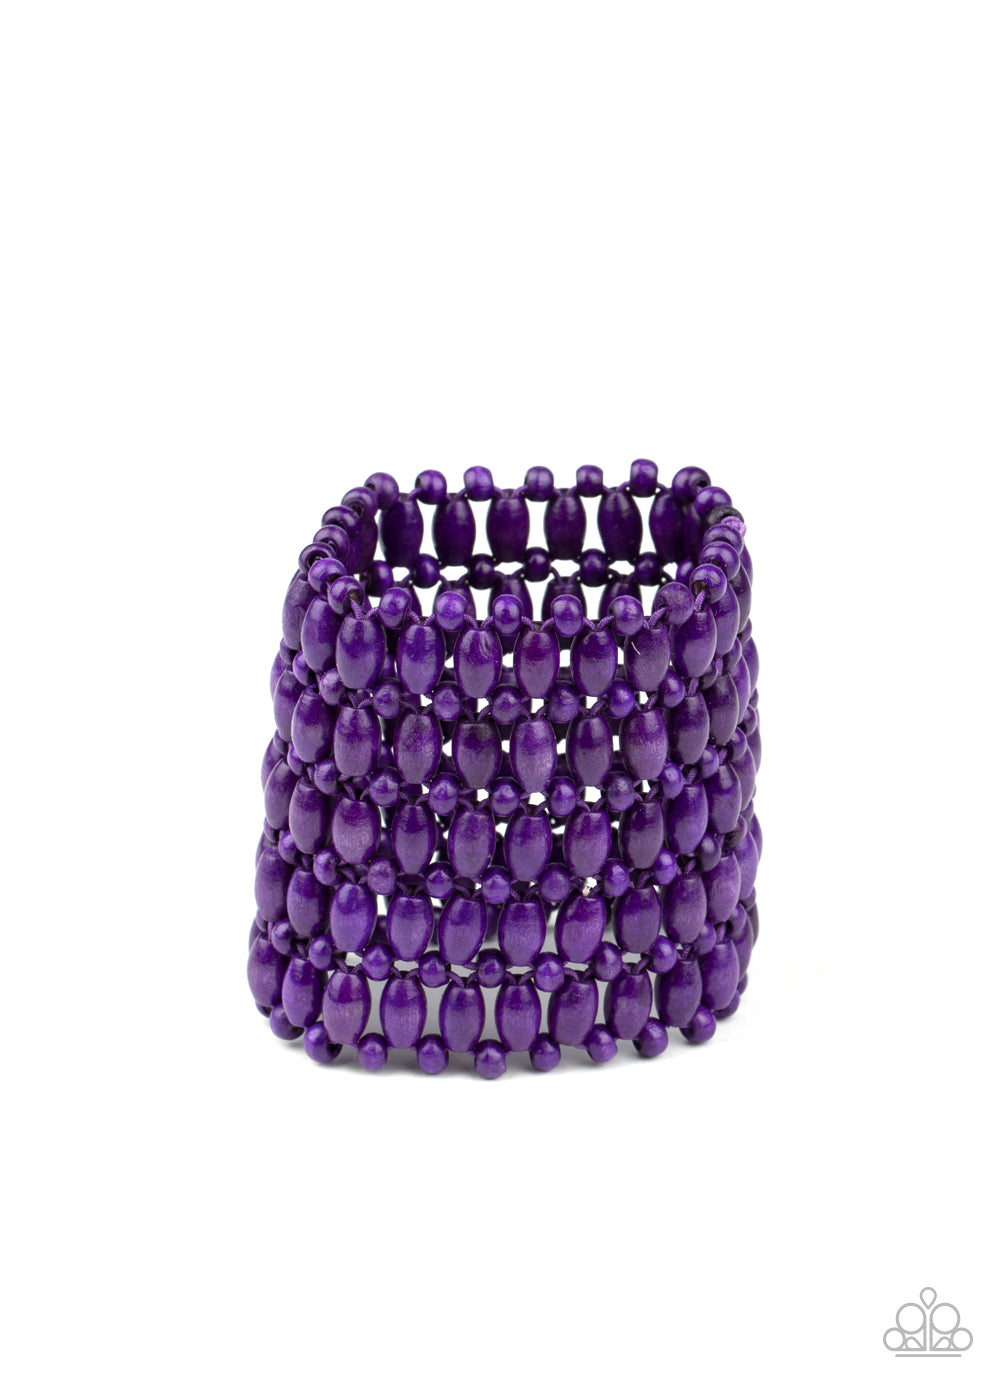 Round and oval purple wooden beads are threaded along stretchy bands that intricately weave around the wrist, coalescing into a colorful stretch bracelet.